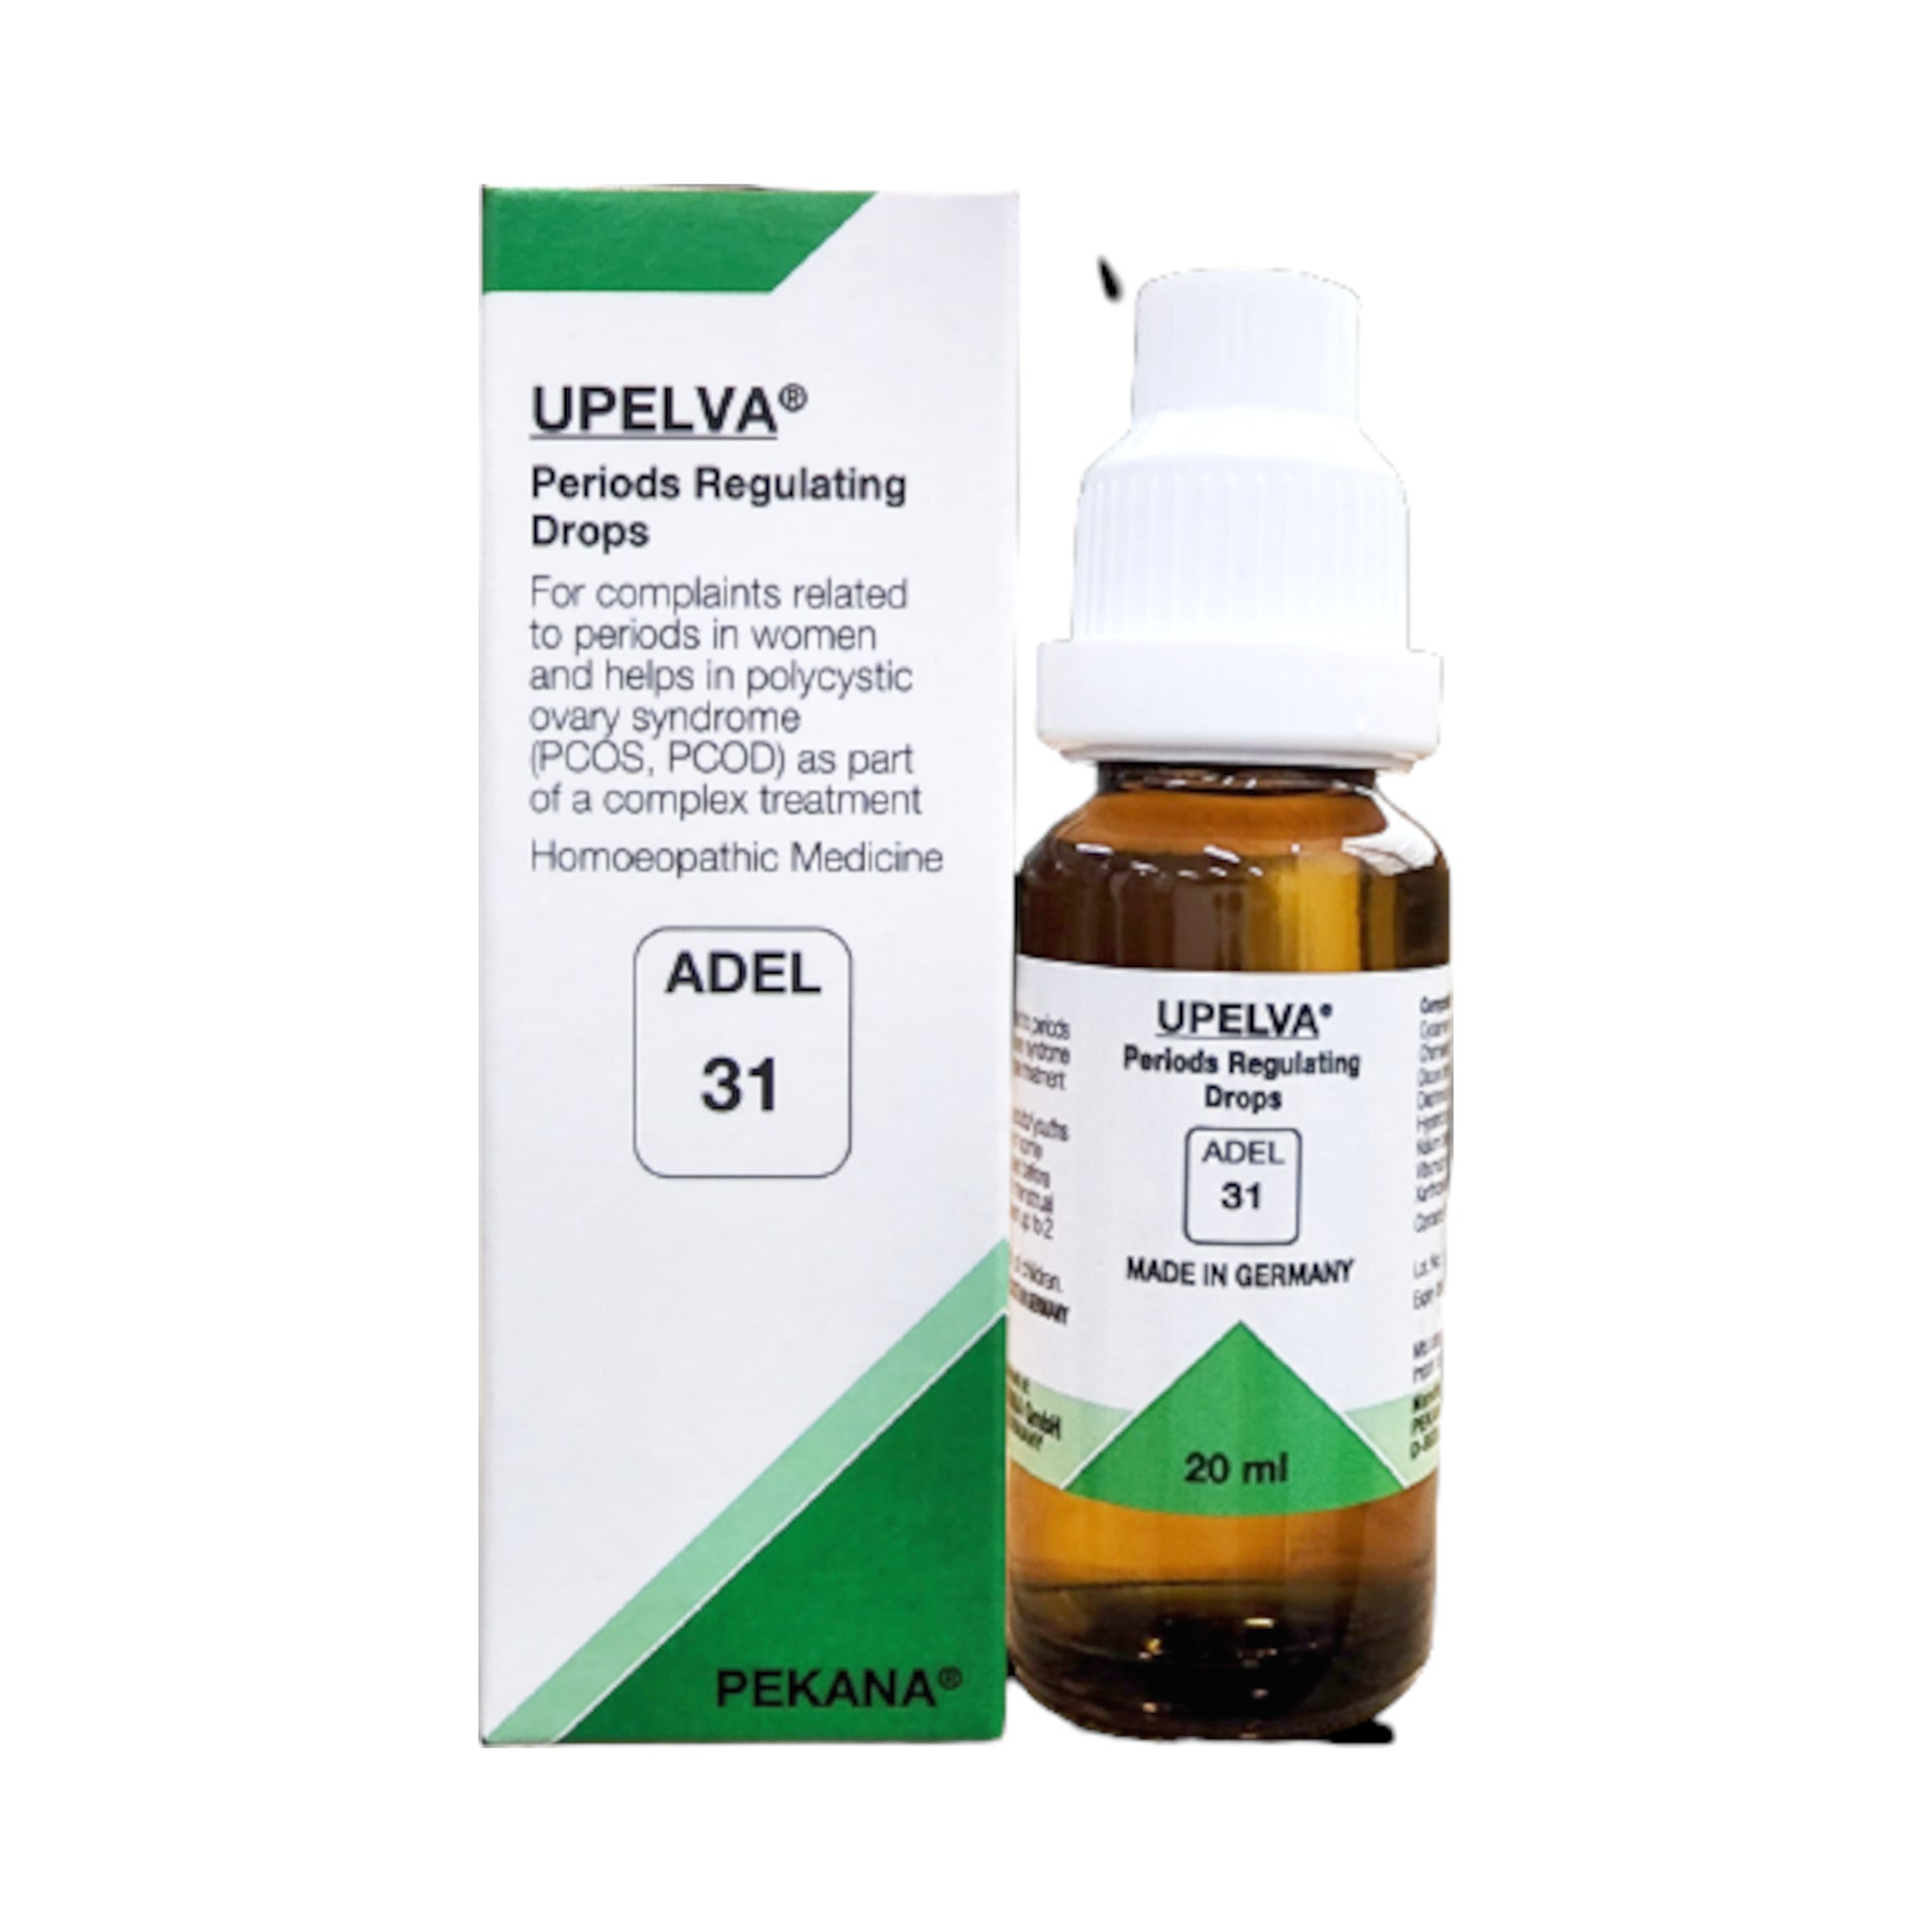 Image: ADEL31 Upelva Drops 20 ml: Homeopathic Relief for Menstrual and Female Health Issues.